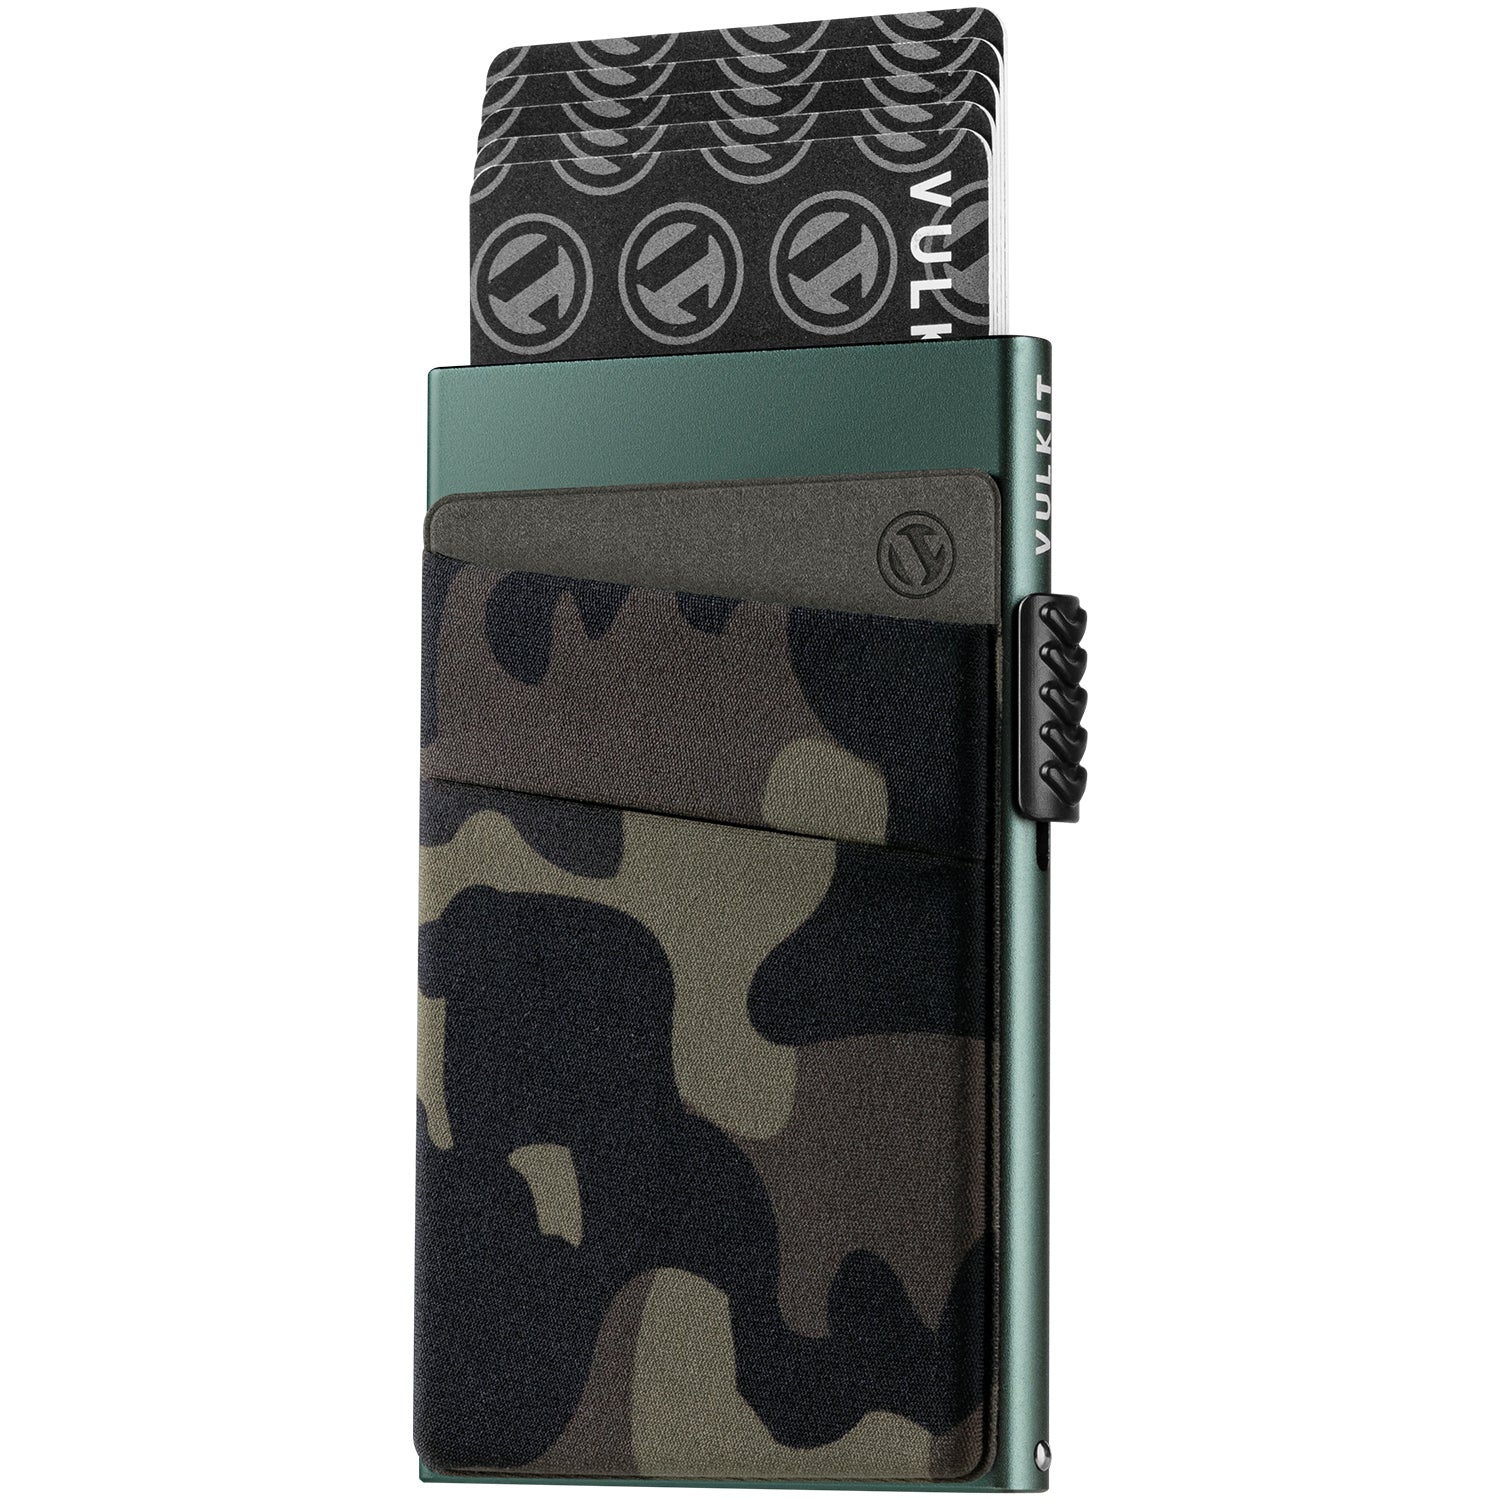 VC307- Camouflage Elastic Cloth Slot For Cash & Coins Card Holder